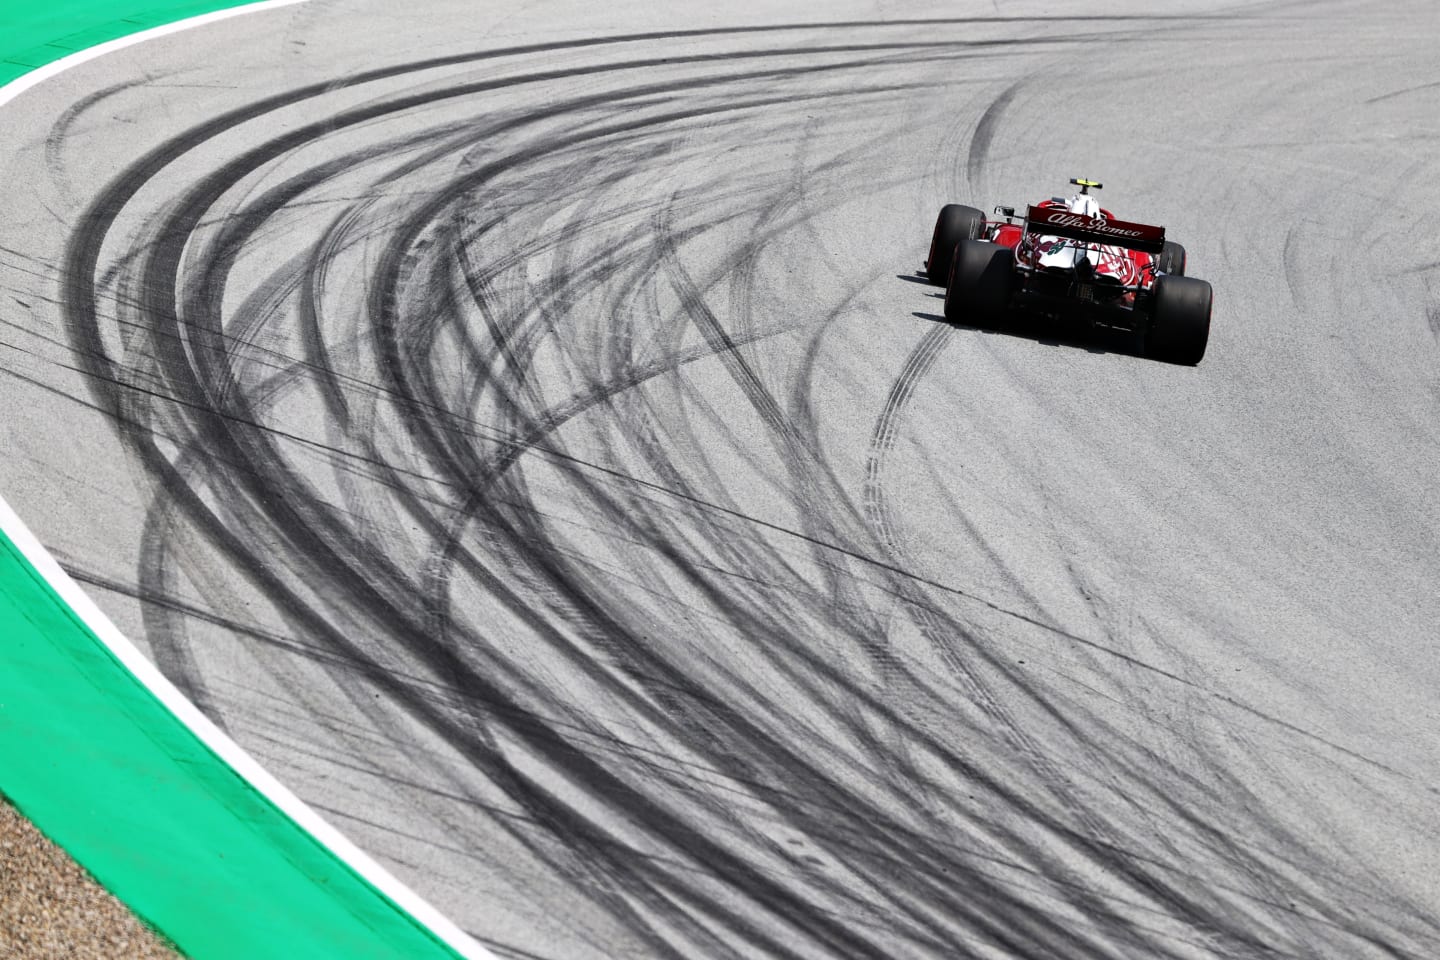 SPIELBERG, AUSTRIA - JUNE 25: Antonio Giovinazzi of Italy driving the (99) Alfa Romeo Racing C41 Ferrari on track during practice ahead of the F1 Grand Prix of Styria at Red Bull Ring on June 25, 2021 in Spielberg, Austria. (Photo by Clive Rose/Getty Images)